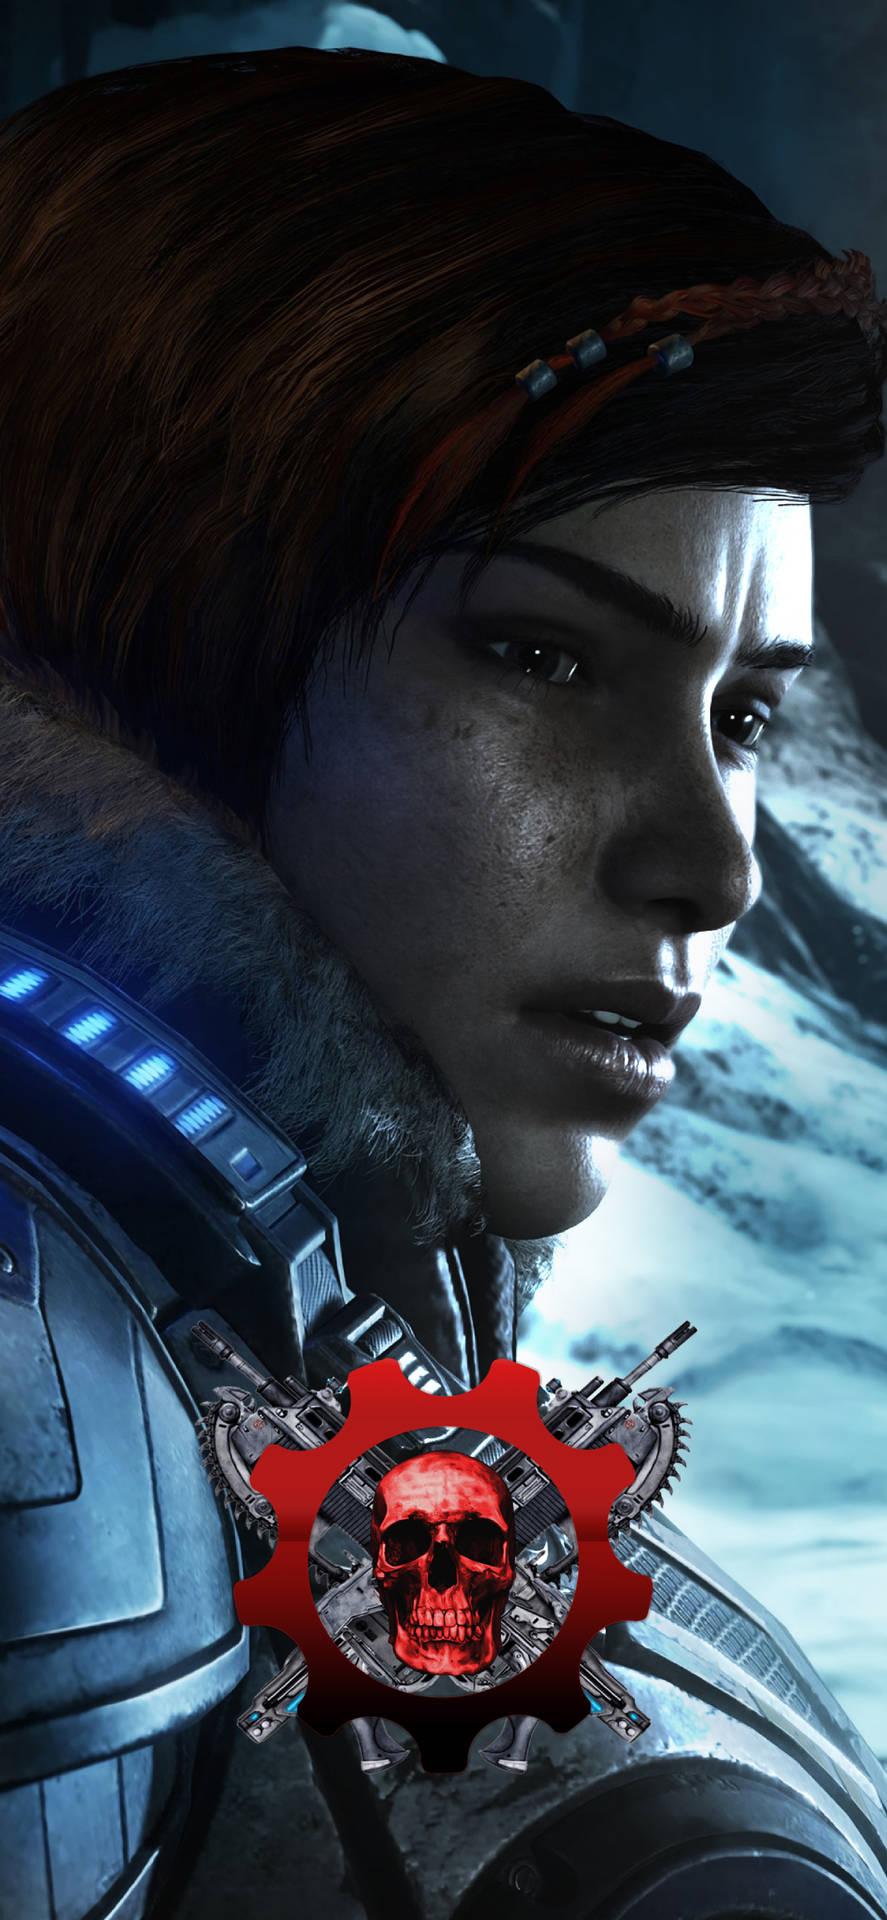 Sorrowful And Teary Kait Diaz Gears 5 Iphone Wallpaper